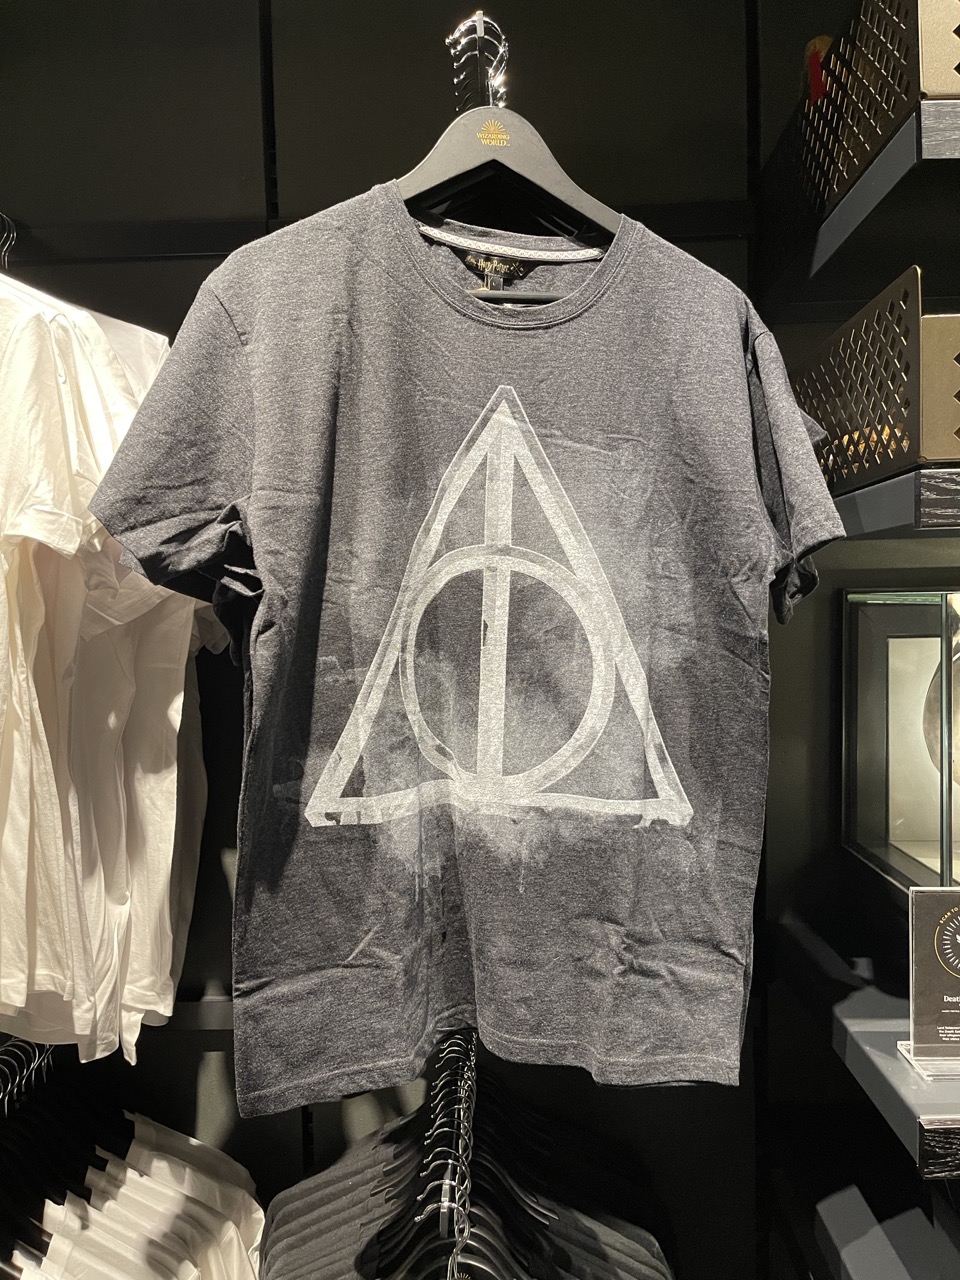 a Picture of the Deathly Hallows Tee shirt